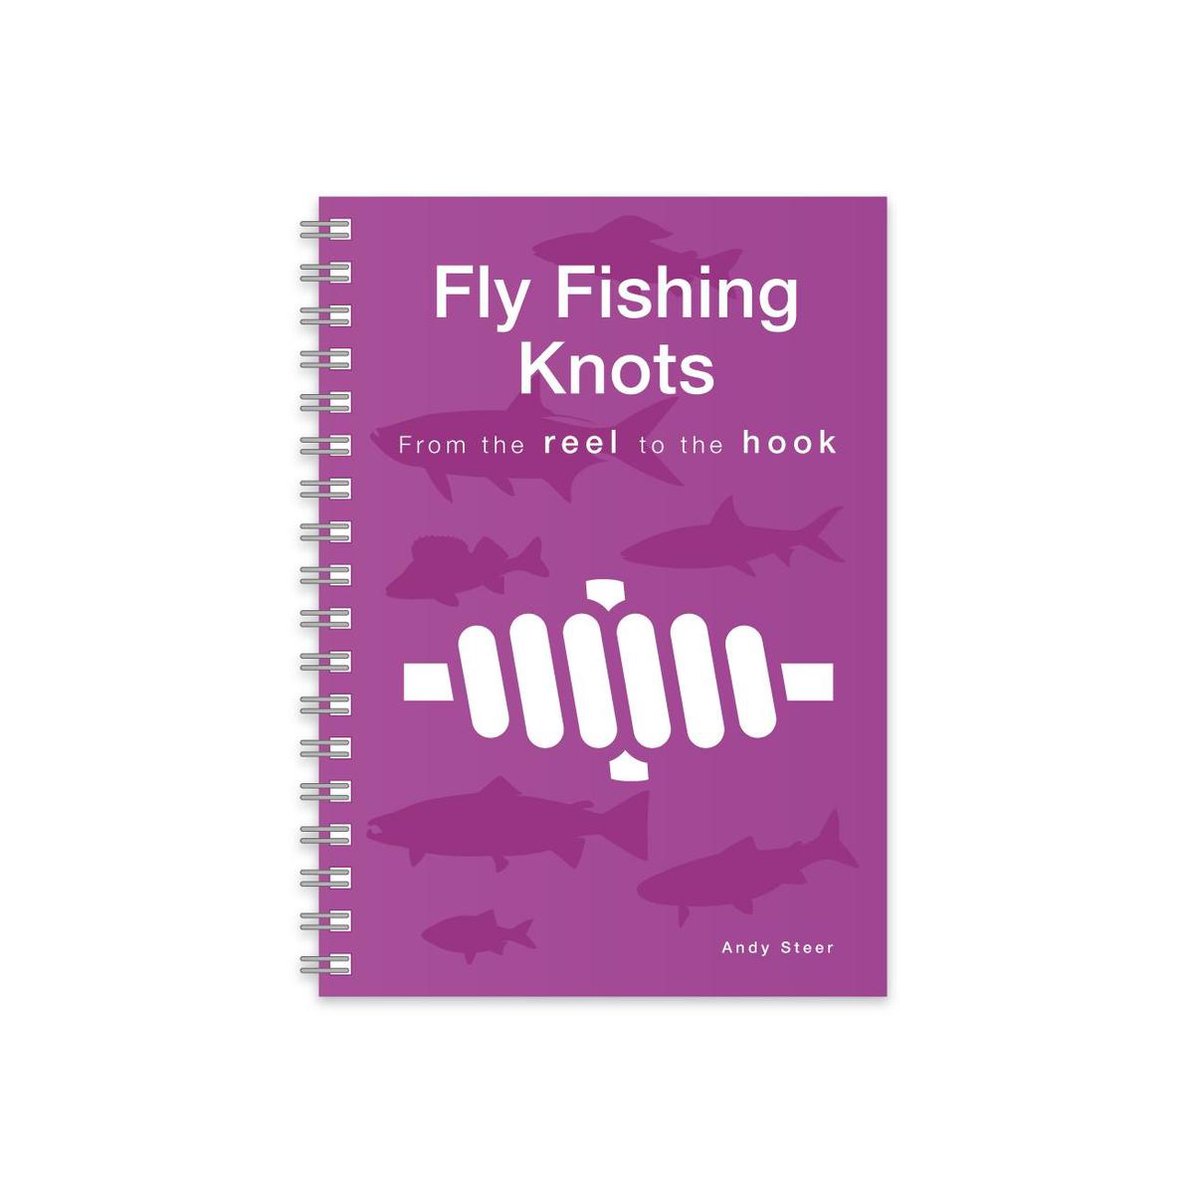 Fly Fishing Knots - From the reel to the hook (Wire-O version